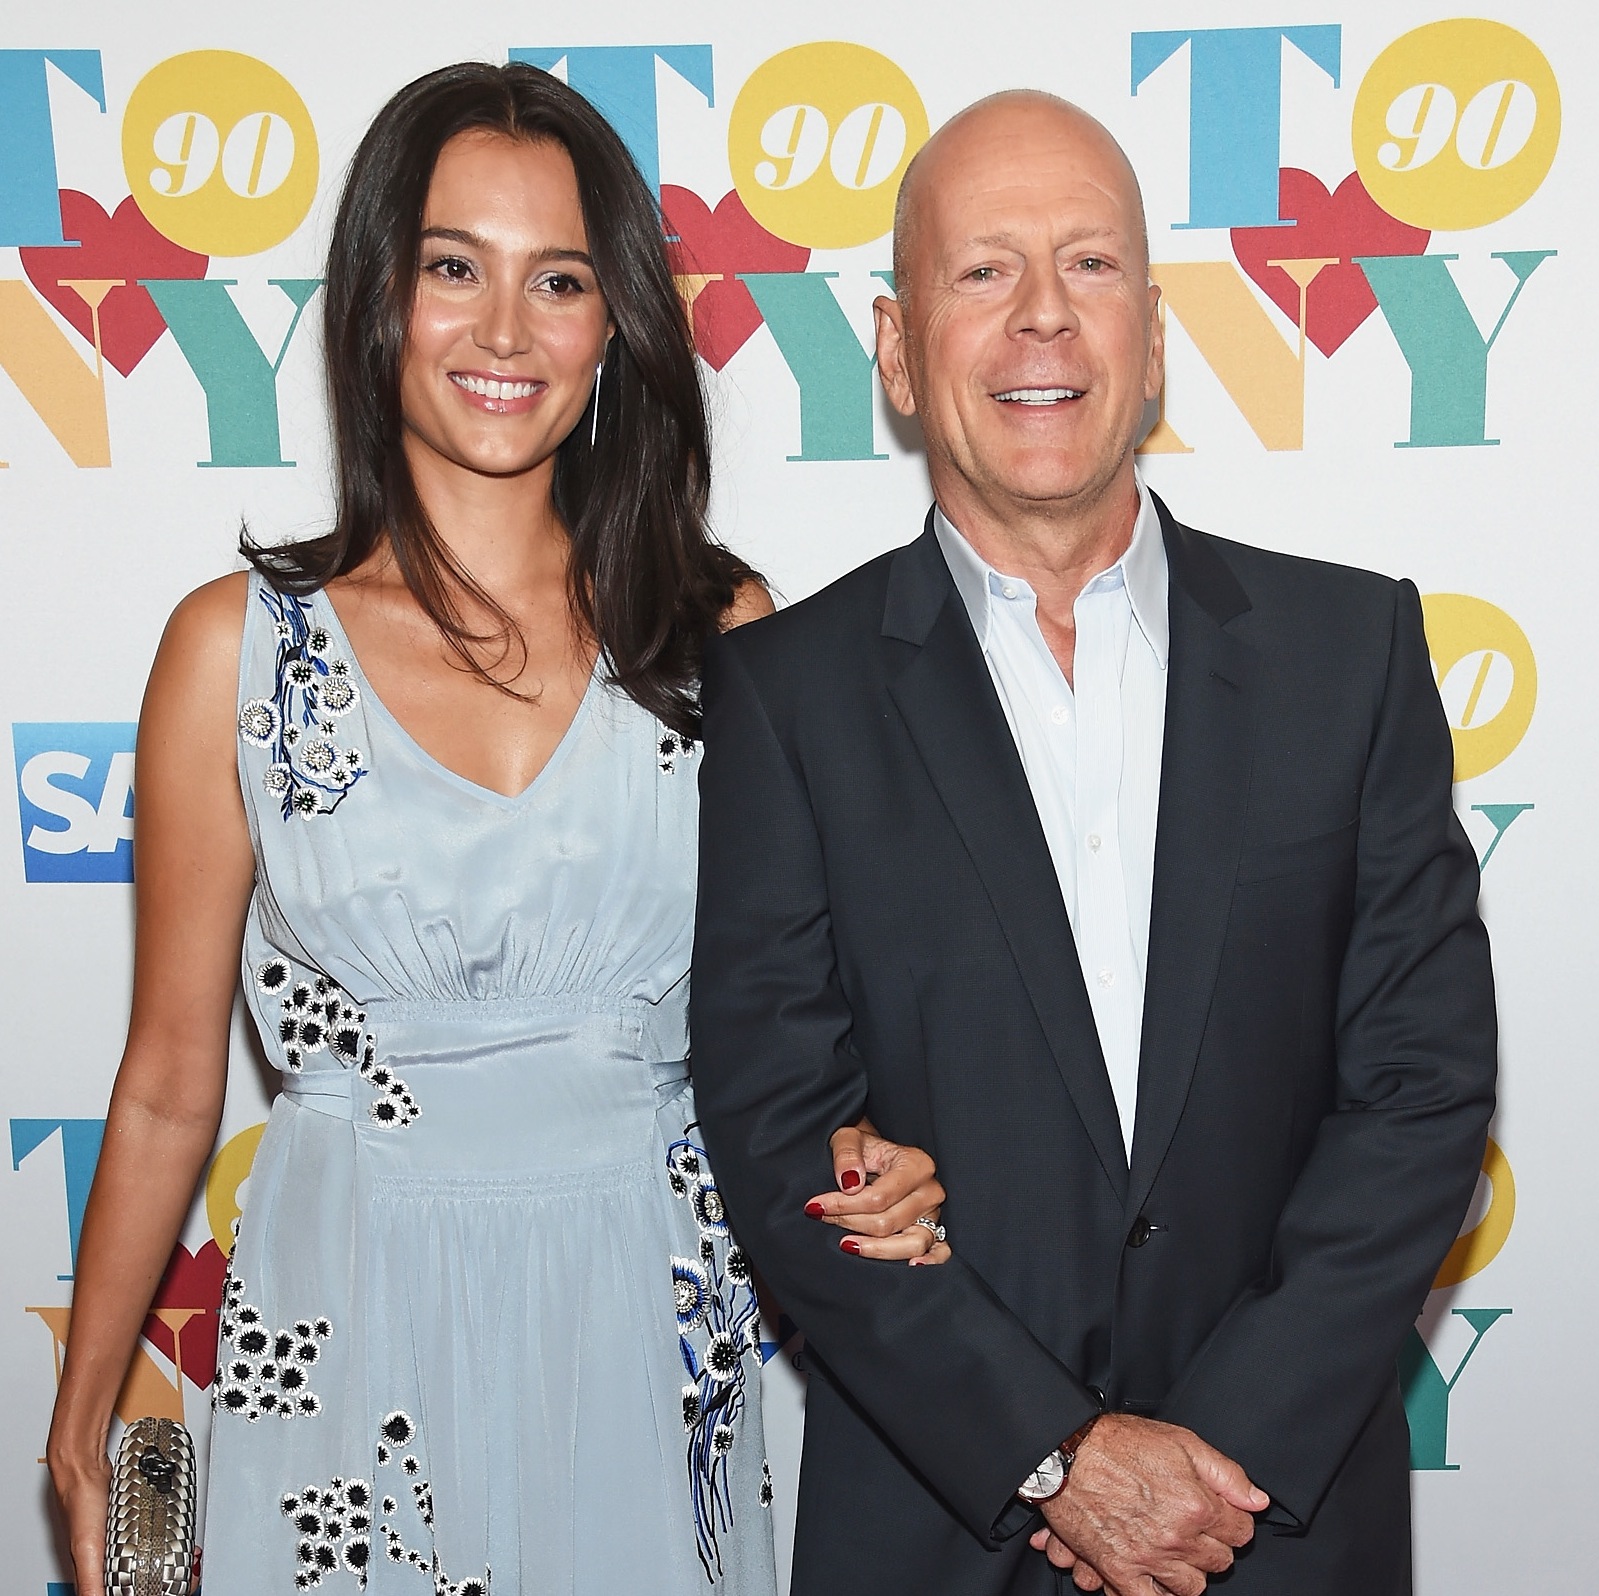 Austrian Billionaire Richard Lugner Divorces Much-Younger Wife After Two Years of Marriage!